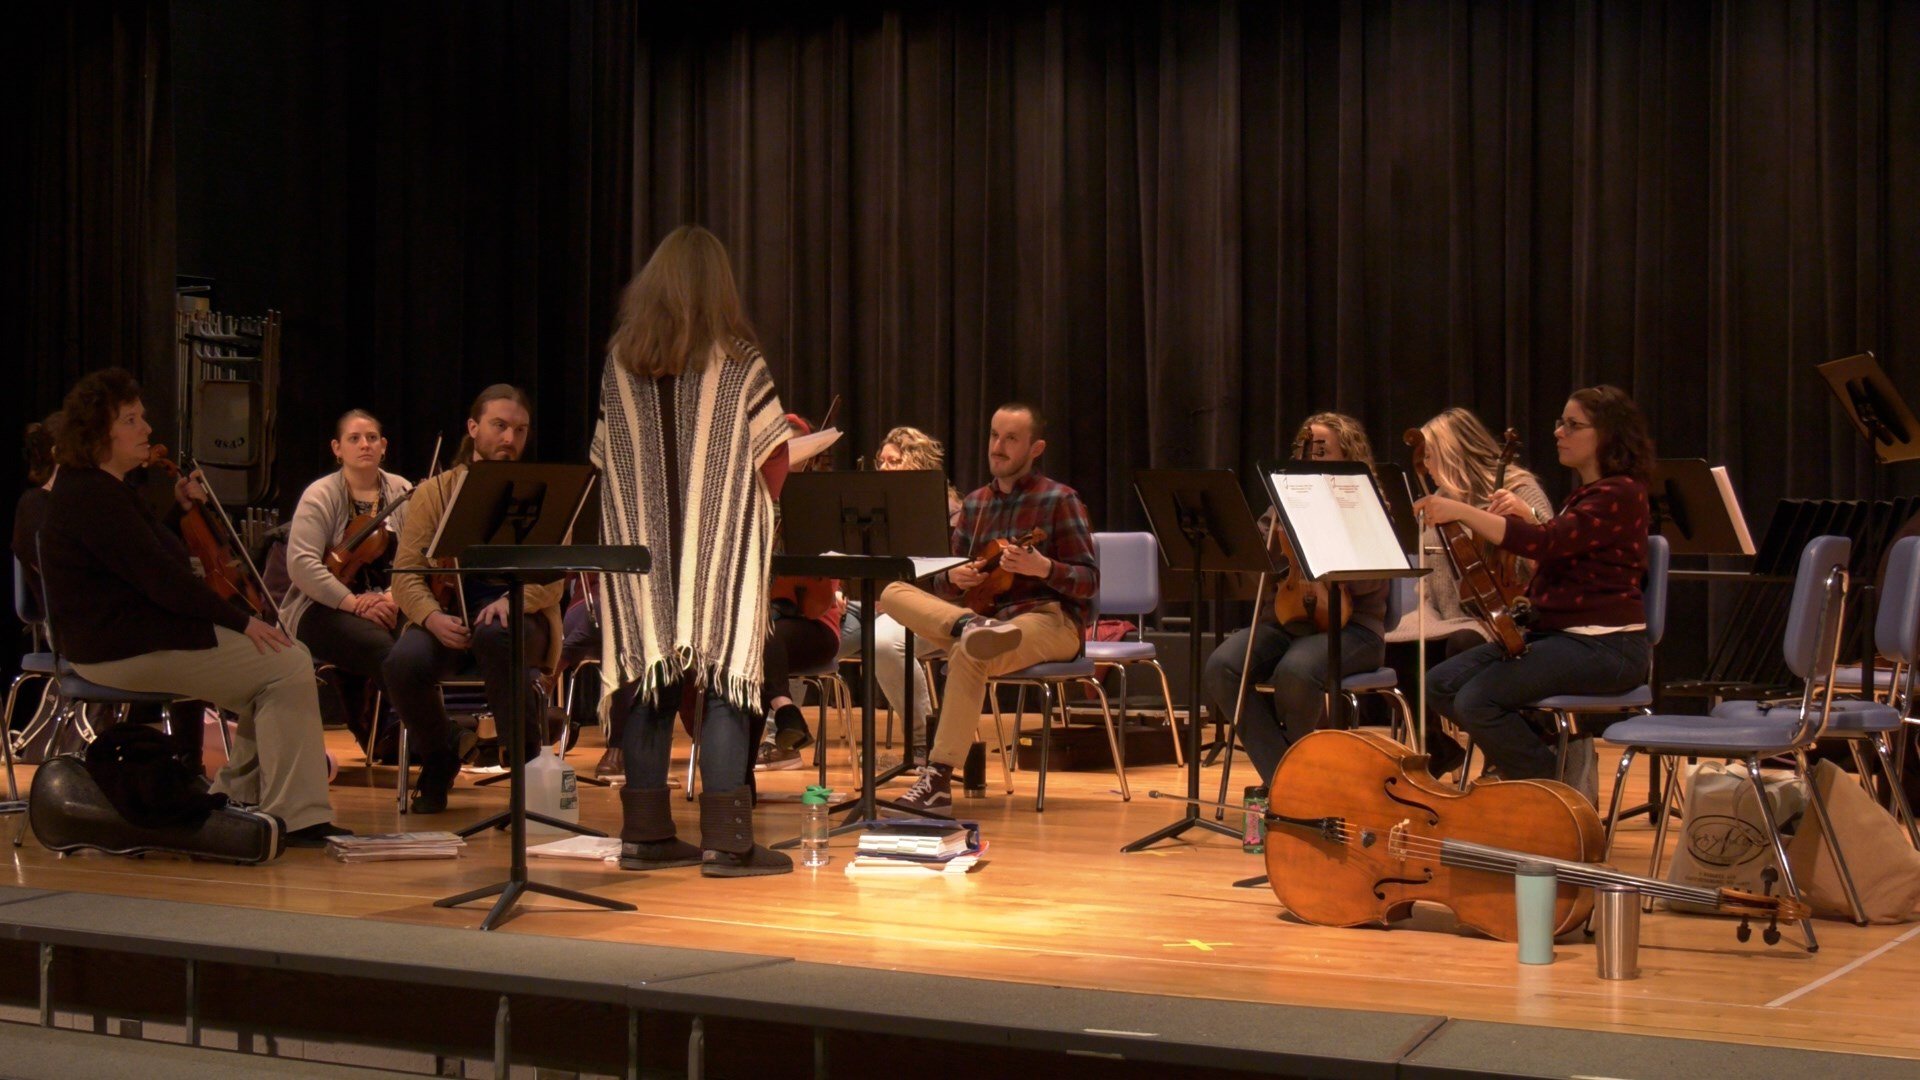 6th Annual Fine Arts Day Hosted by Chenango Forks Elementary